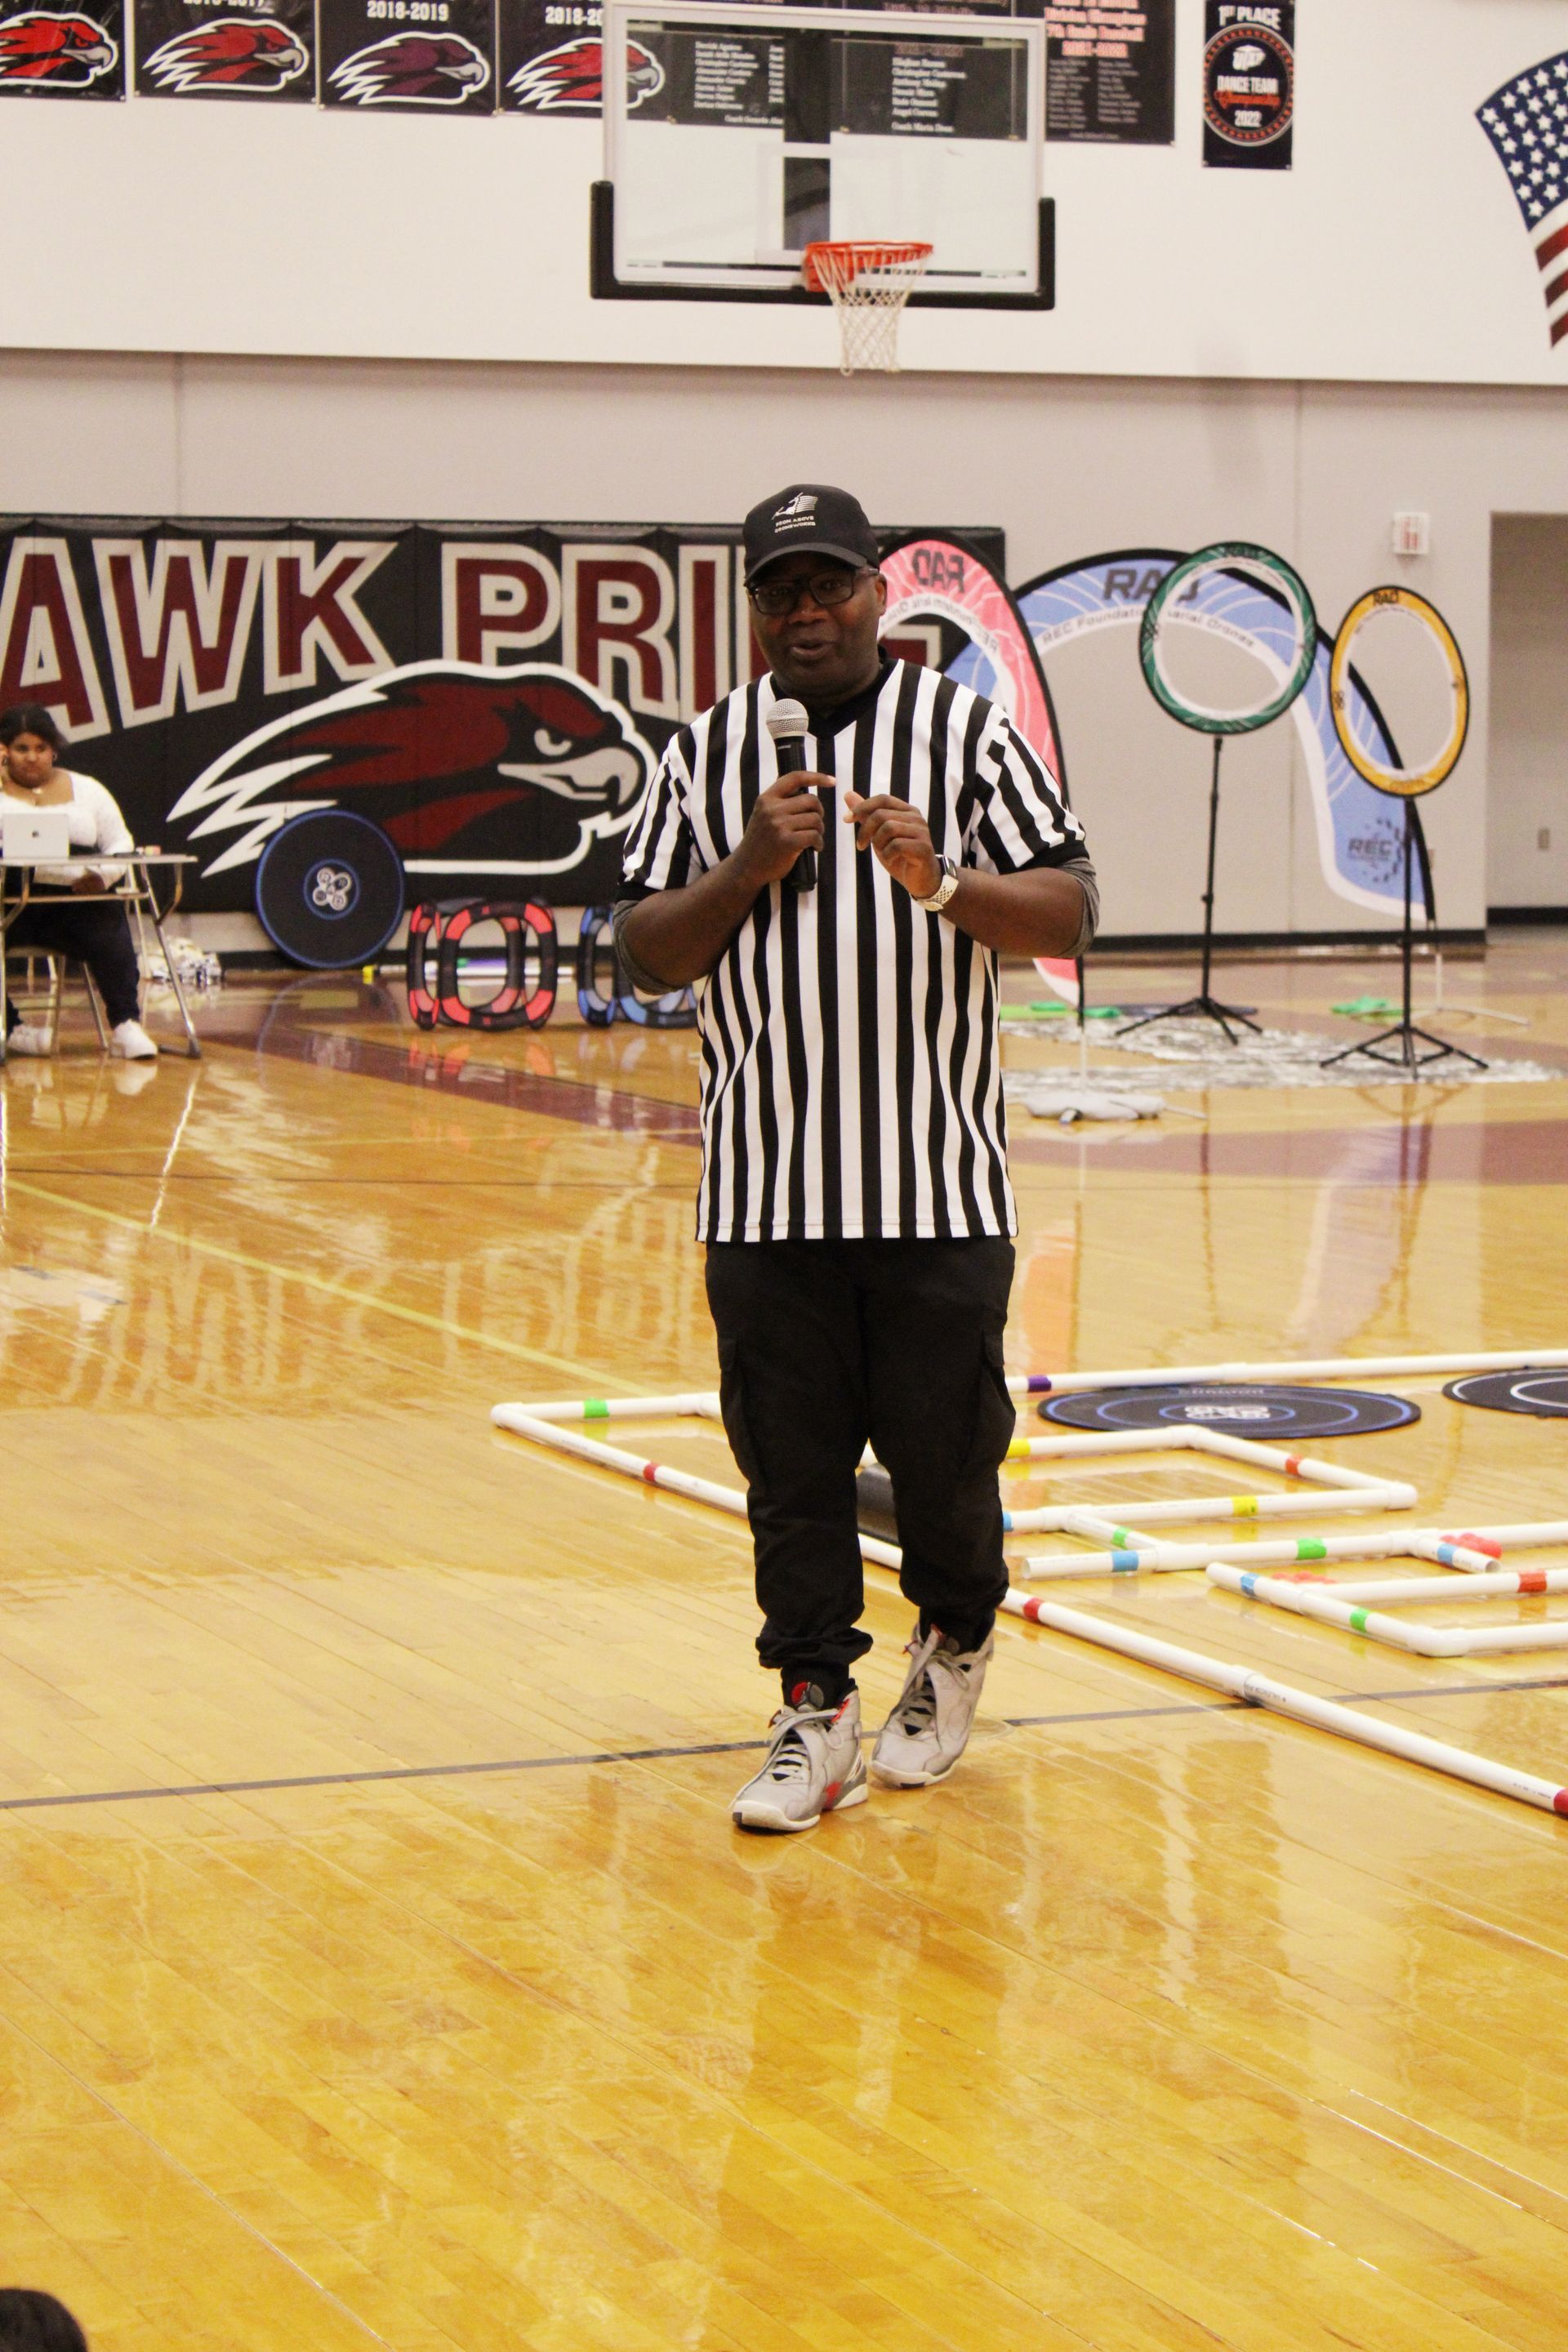 Aerial Drone Competition at Horizon Middle School, Horizon City, Texas. Middle schoolers showcase drone piloting skills in the gym. Dynamic event captured by From Above Droneworks.